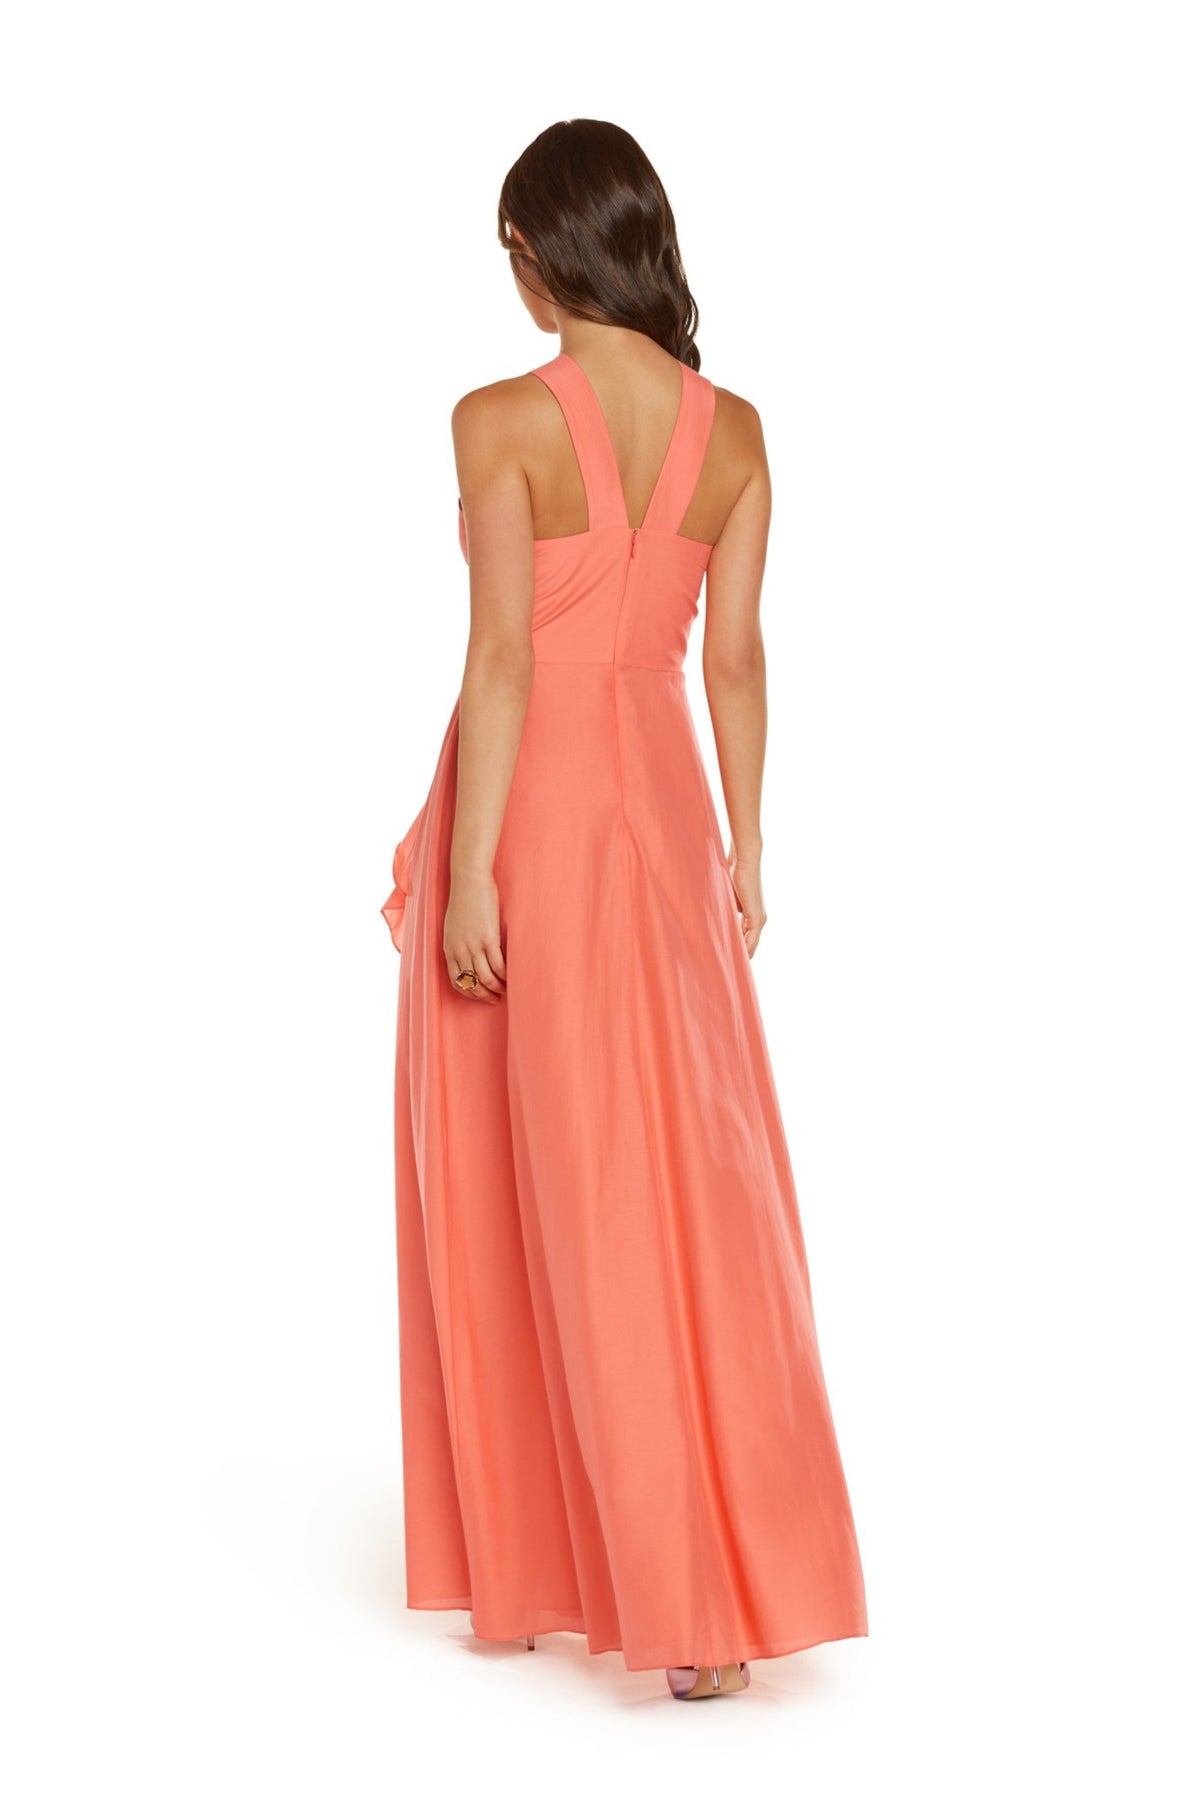 Kathy Halter Maxi Dress in Coral